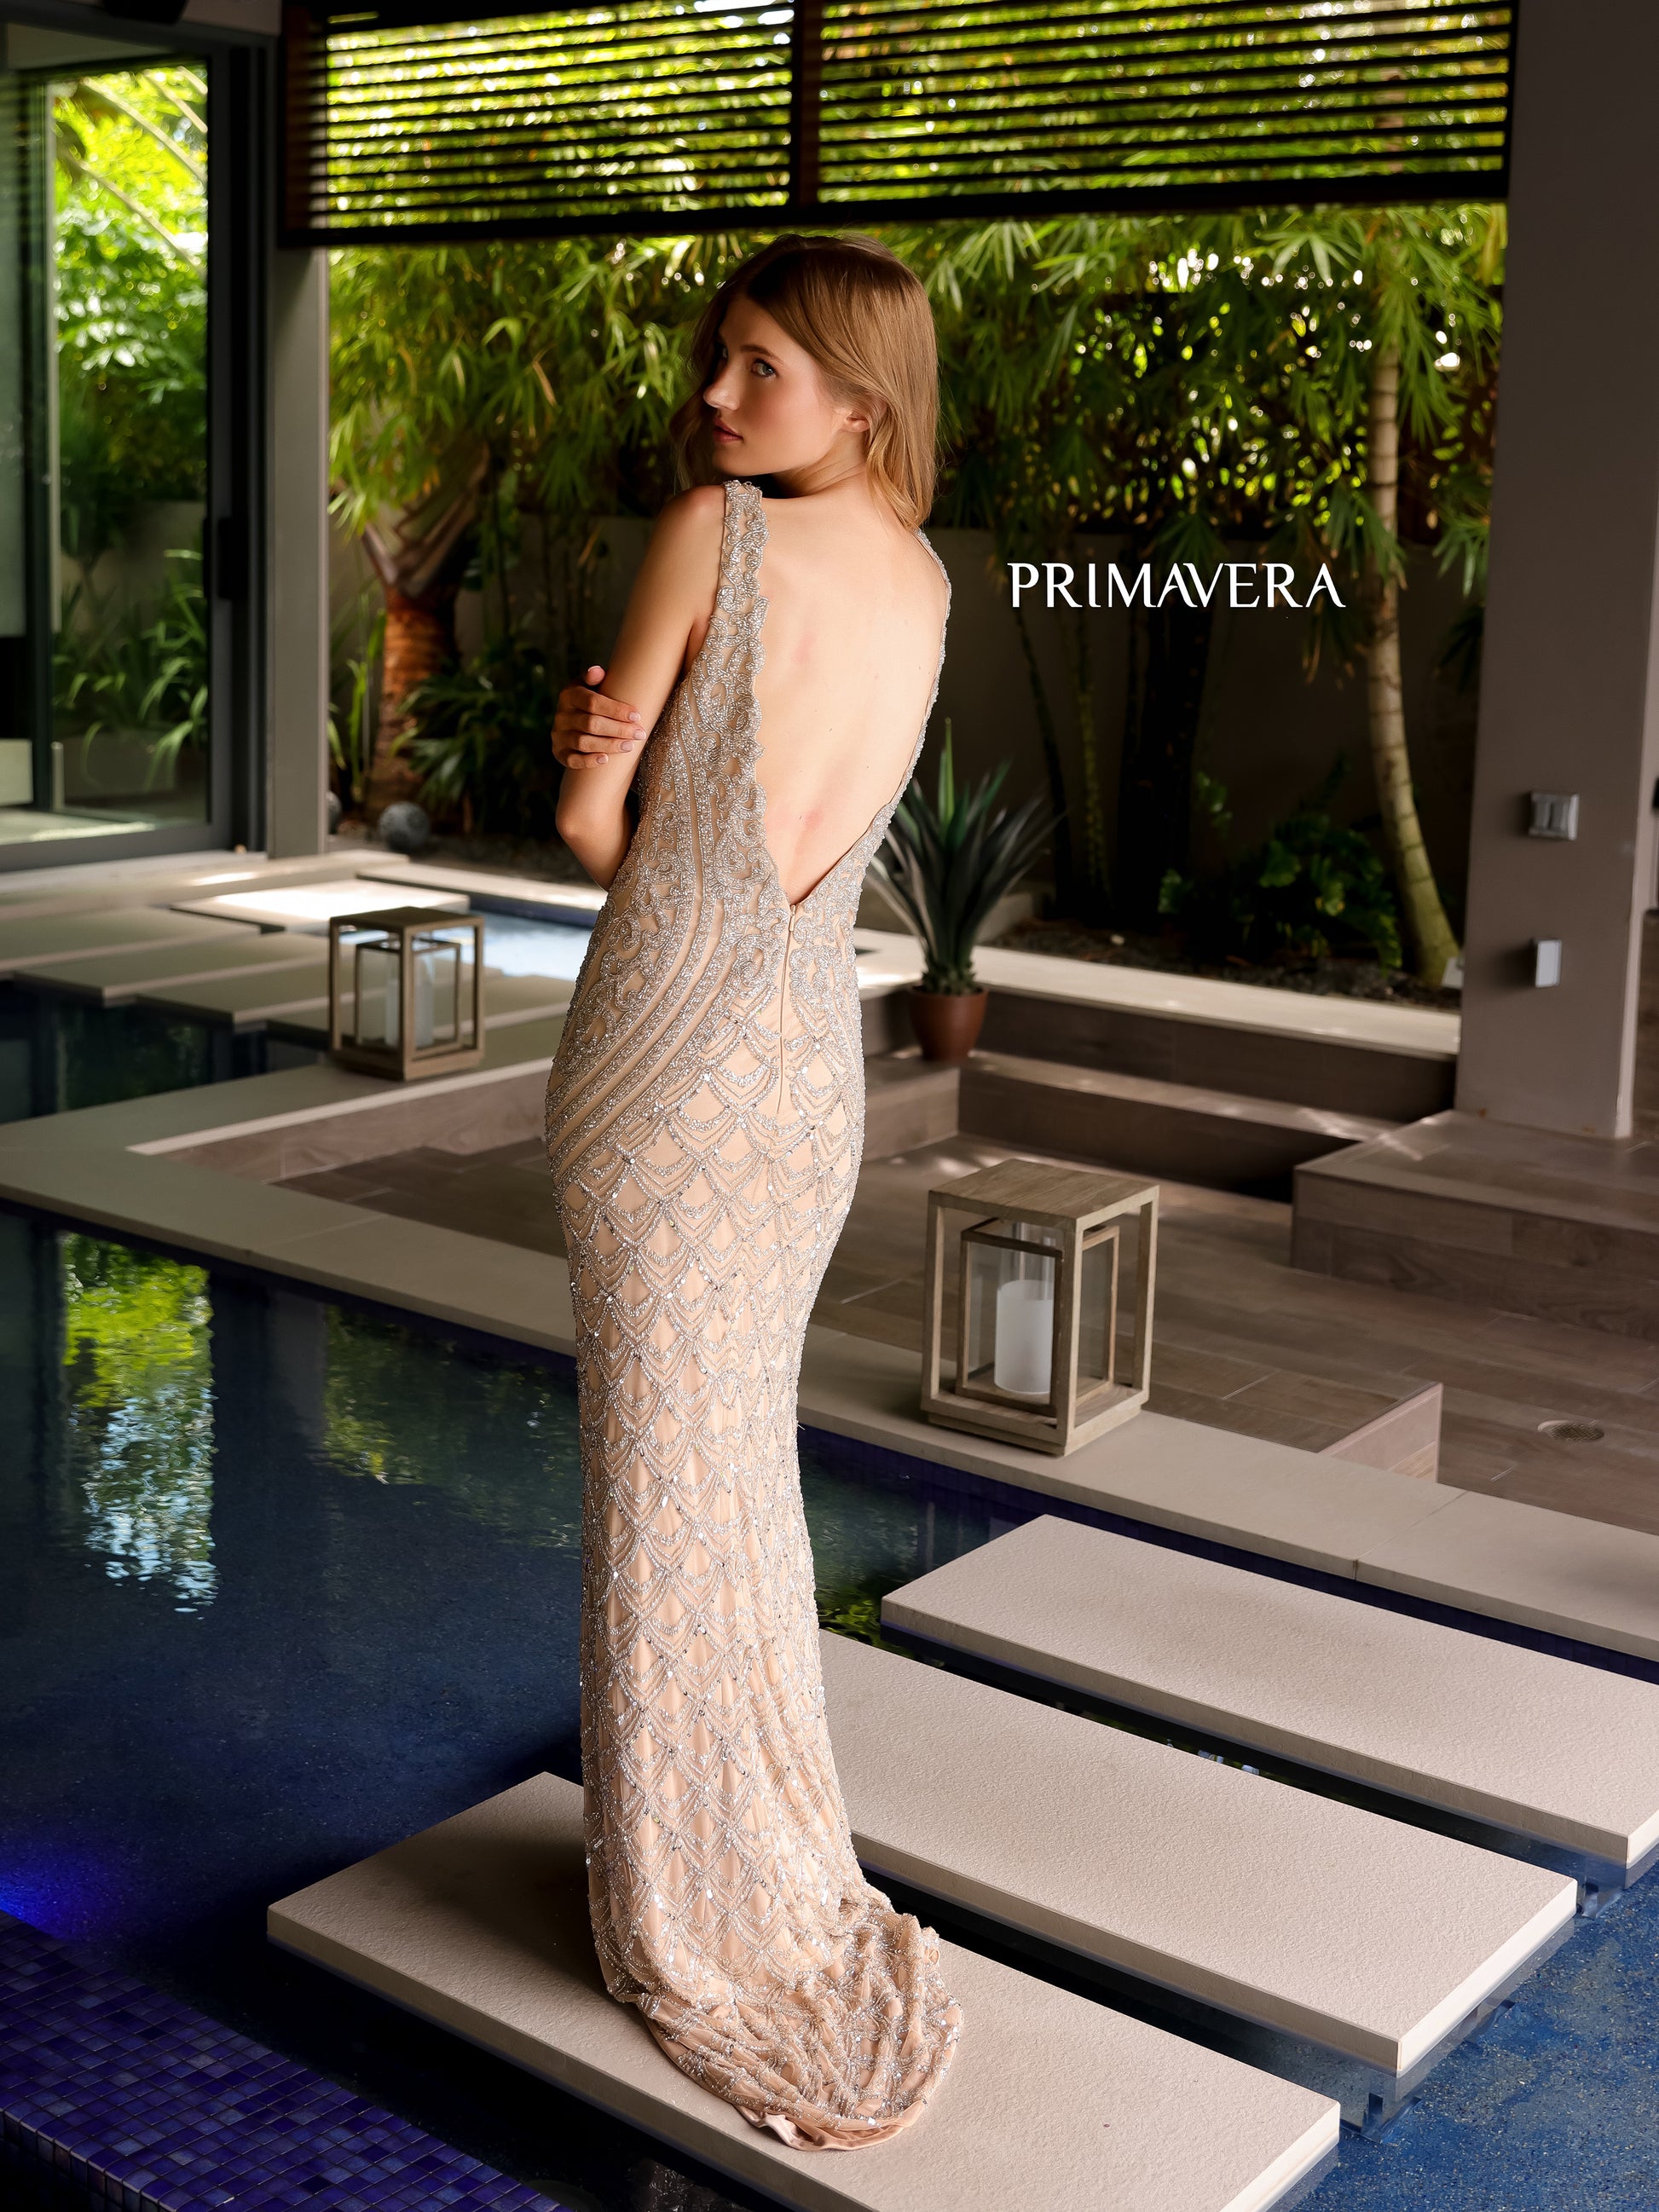 Get ready to turn heads in the elegant Primavera Couture 12102 Long Beaded Formal Evening Dress! With a stunning sequin design and scallop V neck, this backless prom gown will make you stand out from the crowd. Get ready to feel confident and glamorous at any formal event.  Sizes: 000-18  Colors: Coral, Nude/Silver